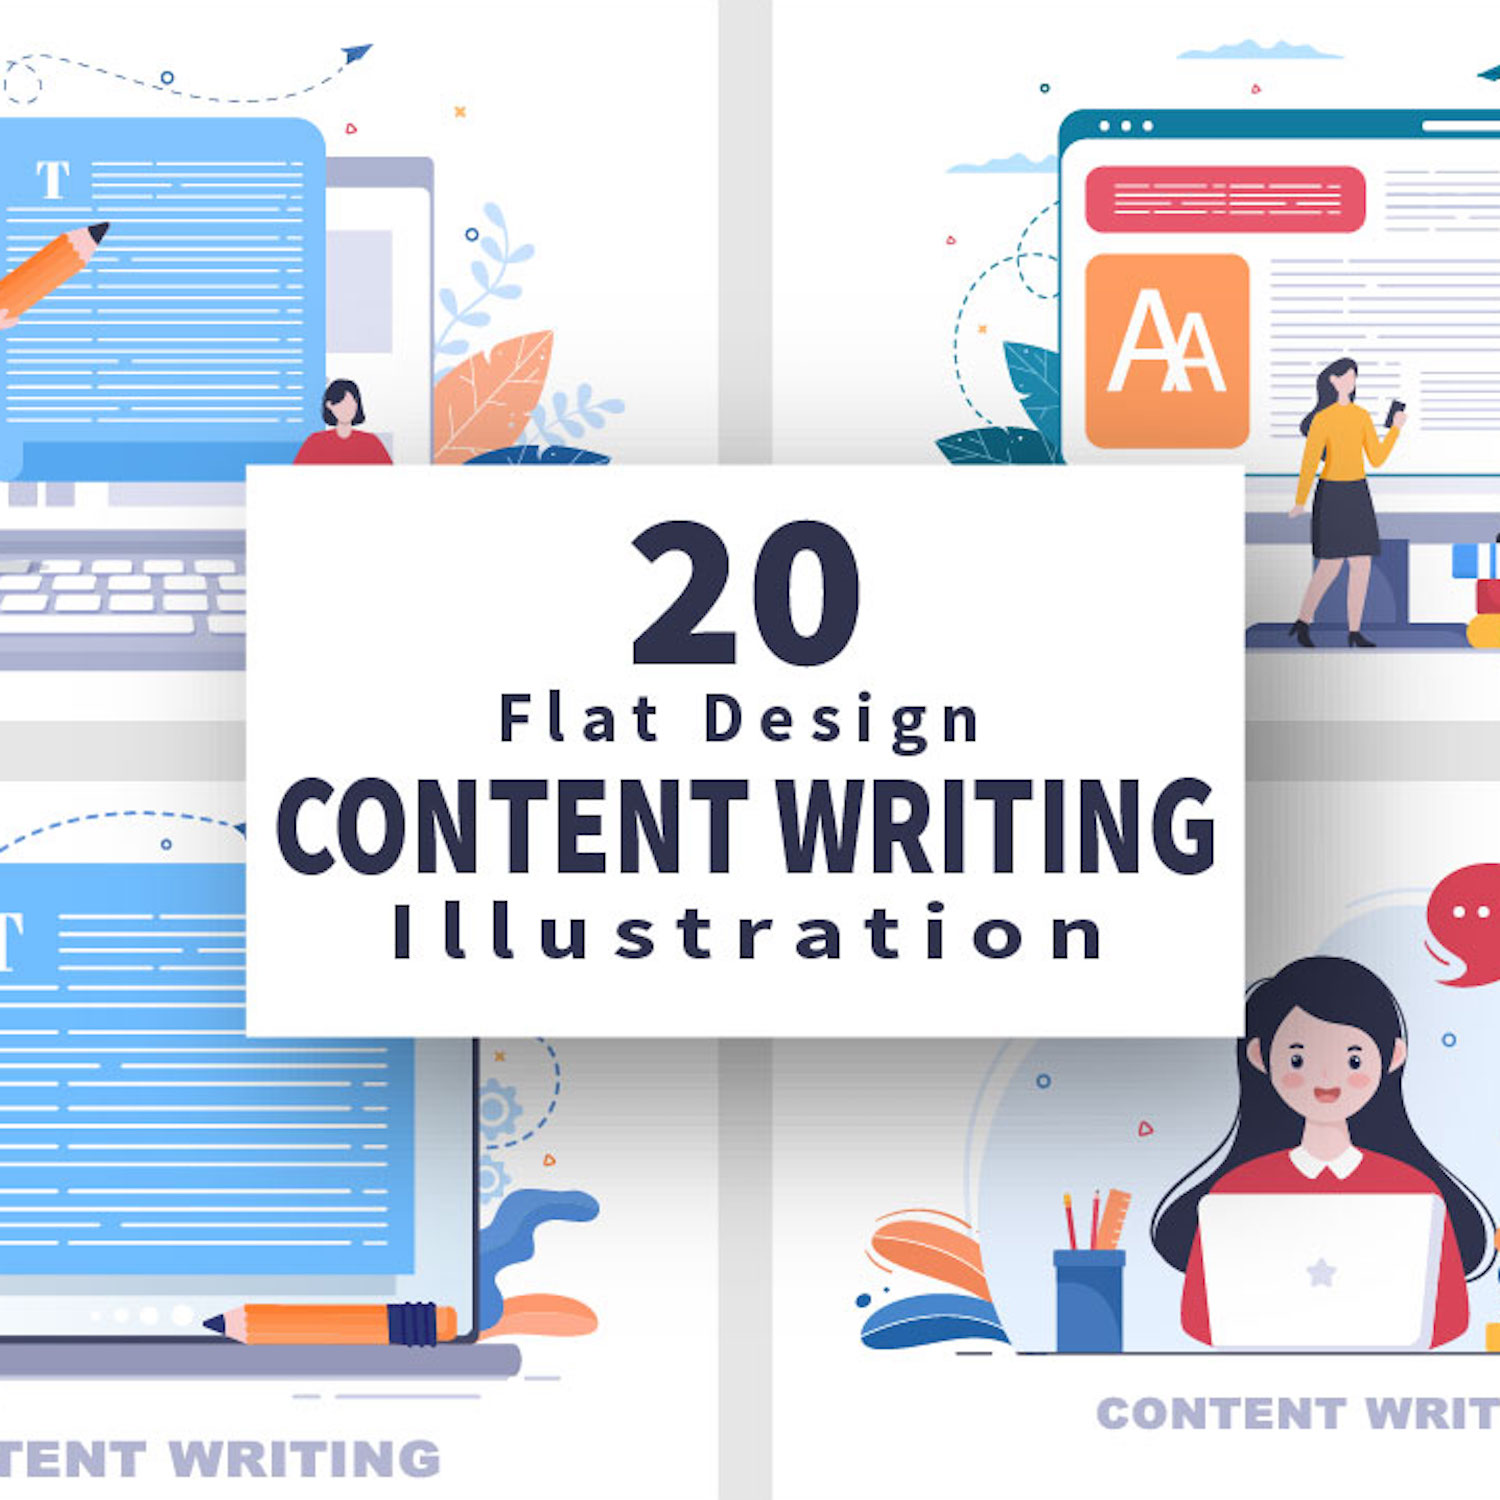 20 Content Writing or Journalist Vector Illustrations cover image.